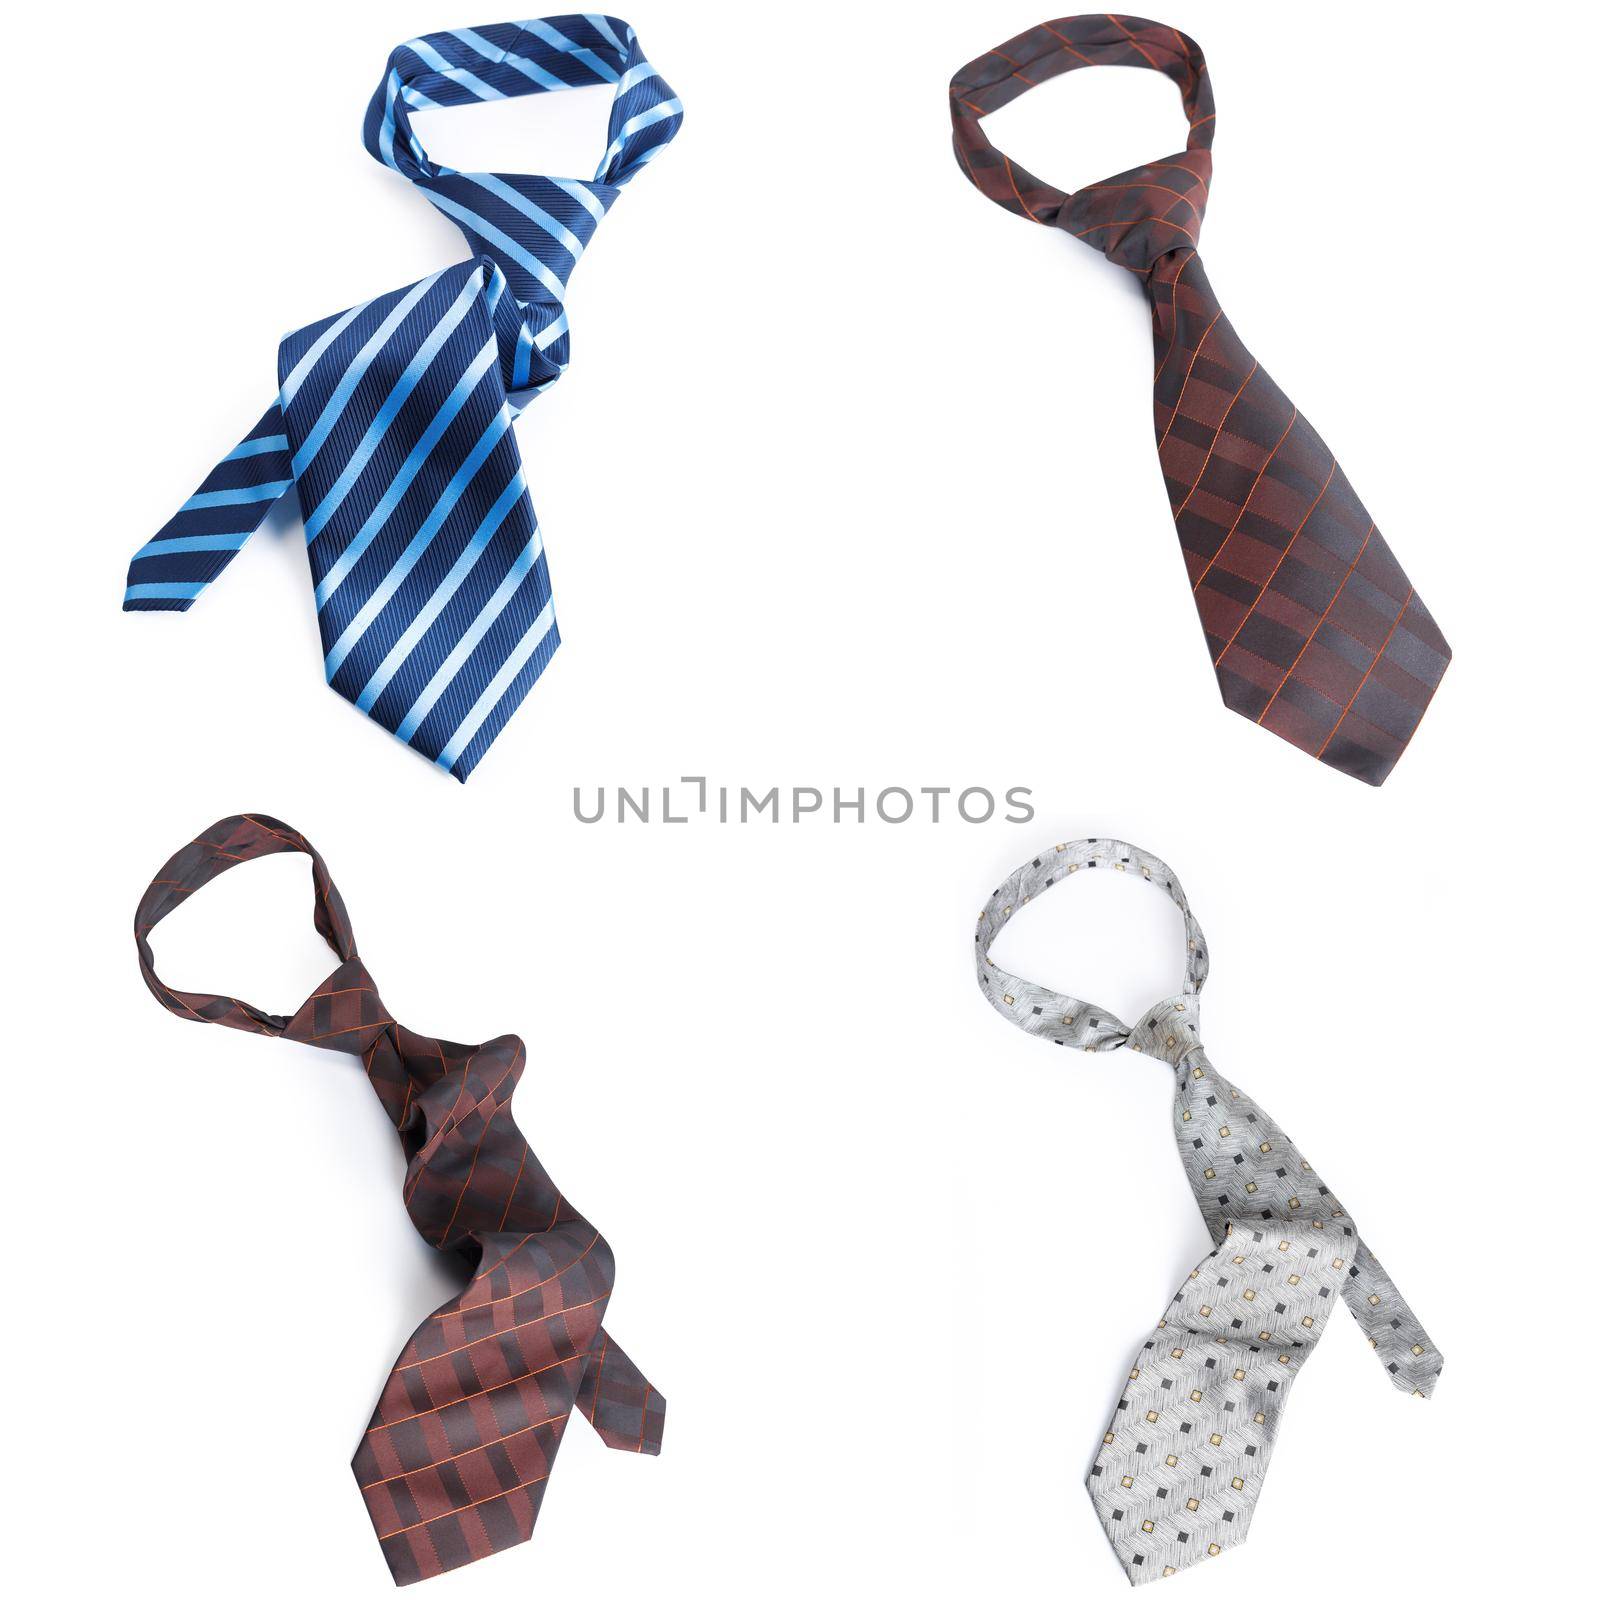 Neck ties collage isolated on white background